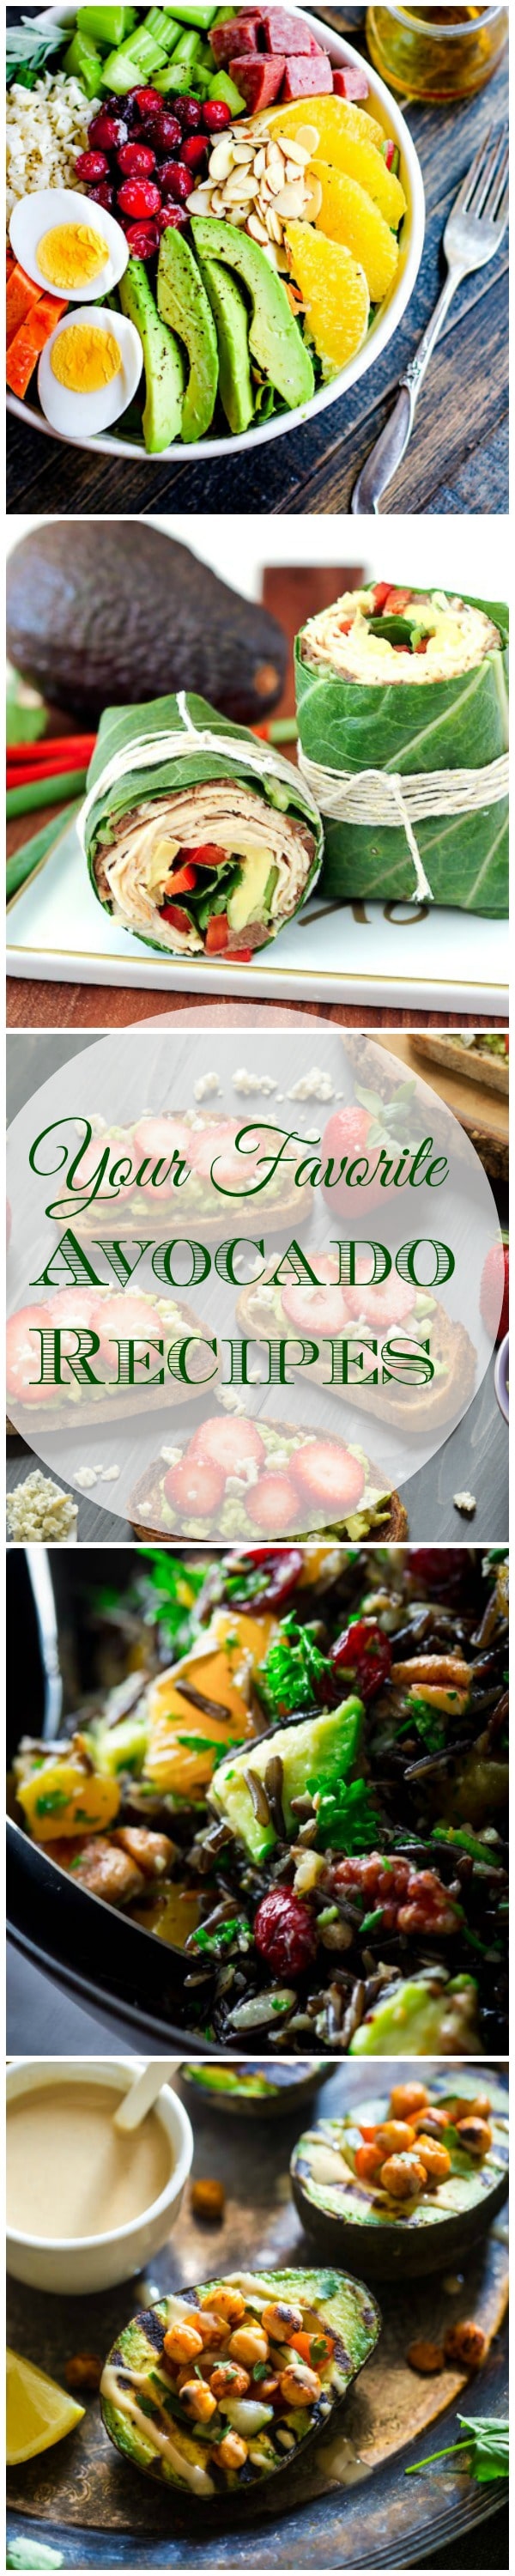 All of Your Favorite Avocado Recipes right here! from Lauren Kelly Nutrition